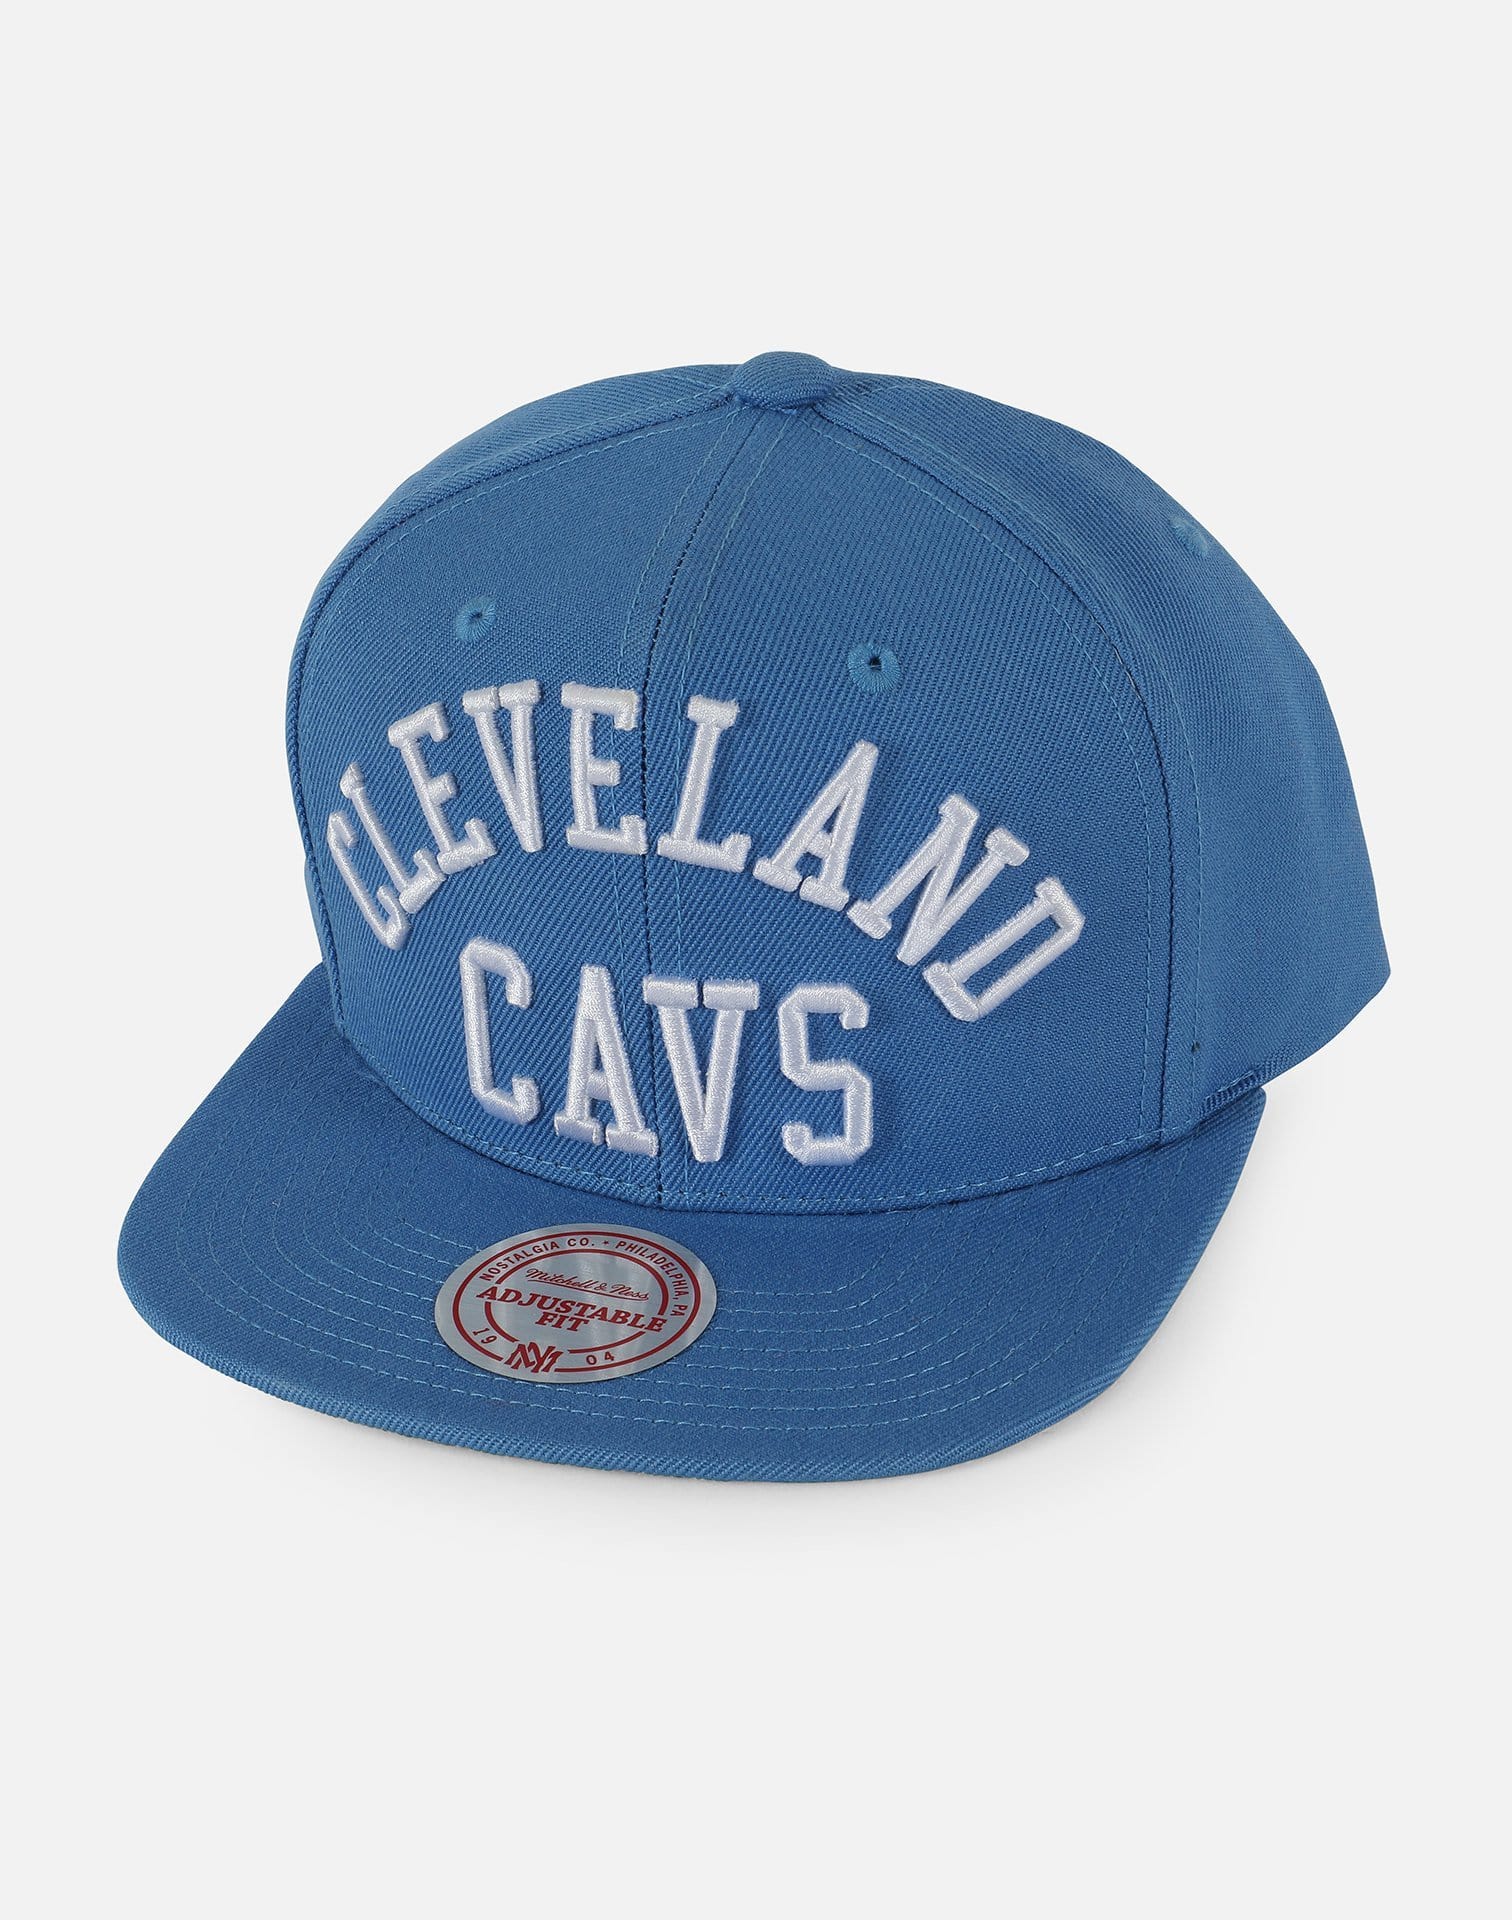 Mitchell and Ness Cleveland Cavaliers Snapback Hat